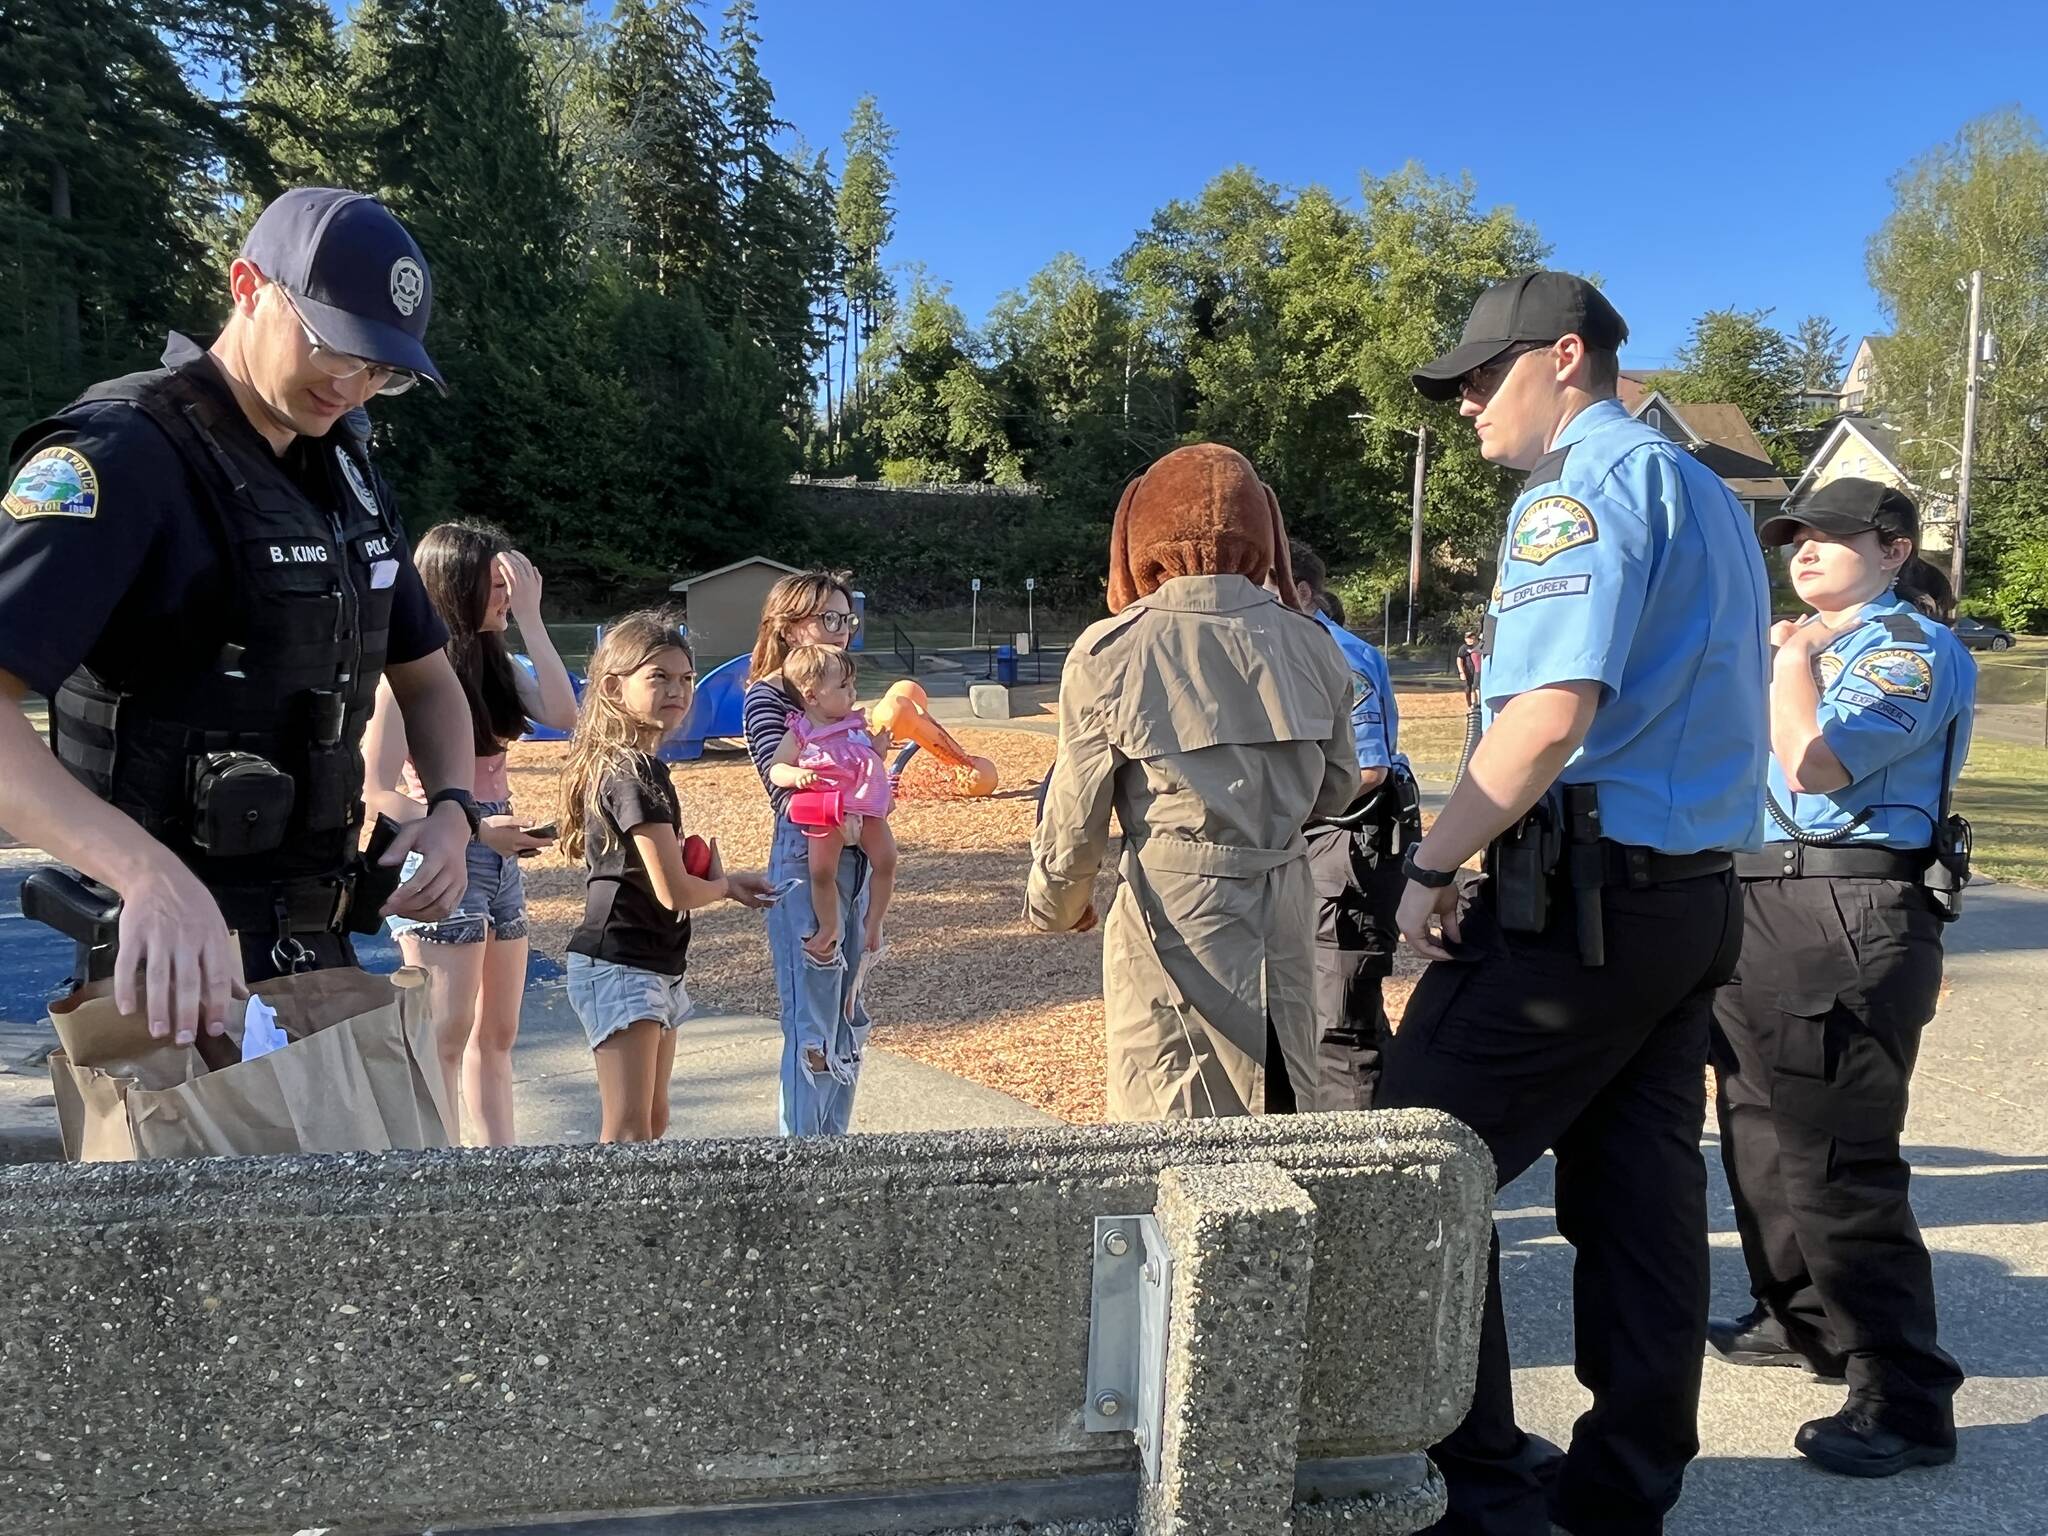 Matthew N. Wells | The Daily World
Aberdeen Police Department officers, and Aberdeen Police Explorers, and McGruff the Crime Dog, happily interact with local children during National Night Out on Tuesday, Aug. 2, 2022, at Sam Benn Park in Aberdeen.